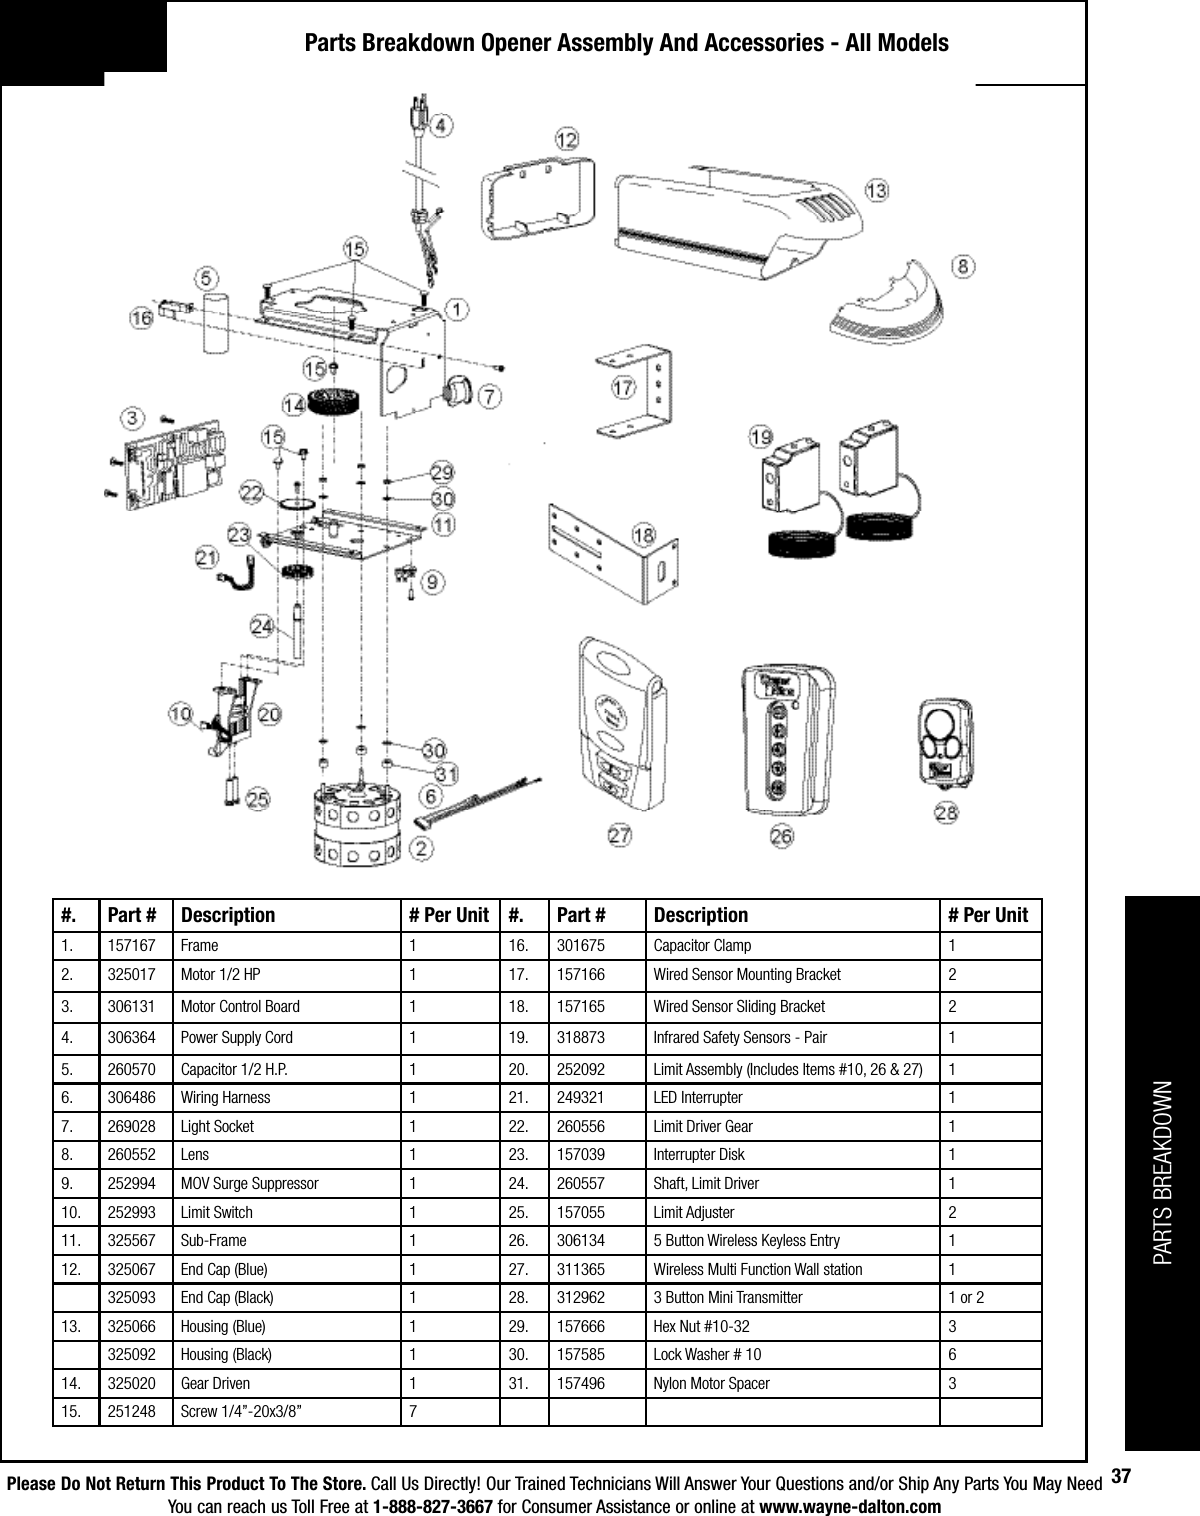 Please Do Not Return This Product To The Store. Call Us Directly! Our Trained Technicians Will Answer Your Questions and/or Ship Any Parts You May NeedYou can reach us Toll Free at 1-888-827-3667 for Consumer Assistance or online at www.wayne-dalton.com37Parts Breakdown Opener Assembly And Accessories - All Models#. Part # Description # Per Unit #. Part # Description # Per Unit1. 157167 Frame 1 16. 301675 Capacitor Clamp 12. 325017 Motor 1/2 HP 1 17. 157166 Wired Sensor Mounting Bracket 23. 306131 Motor Control Board 1 18. 157165 Wired Sensor Sliding Bracket 24. 306364 Power Supply Cord 1 19. 318873 Infrared Safety Sensors - Pair  15. 260570 Capacitor 1/2 H.P. 1 20. 252092 Limit Assembly (Includes Items #10, 26 &amp; 27) 16. 306486 Wiring Harness 1 21. 249321 LED Interrupter 17. 269028 Light Socket 1 22. 260556 Limit Driver Gear 18. 260552 Lens 1 23. 157039 Interrupter Disk 19. 252994 MOV Surge Suppressor 1 24. 260557 Shaft, Limit Driver 110. 252993 Limit Switch 1 25. 157055 Limit Adjuster 211. 325567 Sub-Frame 1 26. 306134 5 Button Wireless Keyless Entry 112. 325067 End Cap (Blue) 1 27. 311365 Wireless Multi Function Wall station 1325093 End Cap (Black) 1 28. 312962 3 Button Mini Transmitter 1 or 213. 325066 Housing (Blue) 1 29. 157666 Hex Nut #10-32 3325092 Housing (Black) 1 30. 157585 Lock Washer # 10 614. 325020 Gear Driven 1 31. 157496 Nylon Motor Spacer 315. 251248 Screw 1/4”-20x3/8” 7PARTS BREAKDOWN